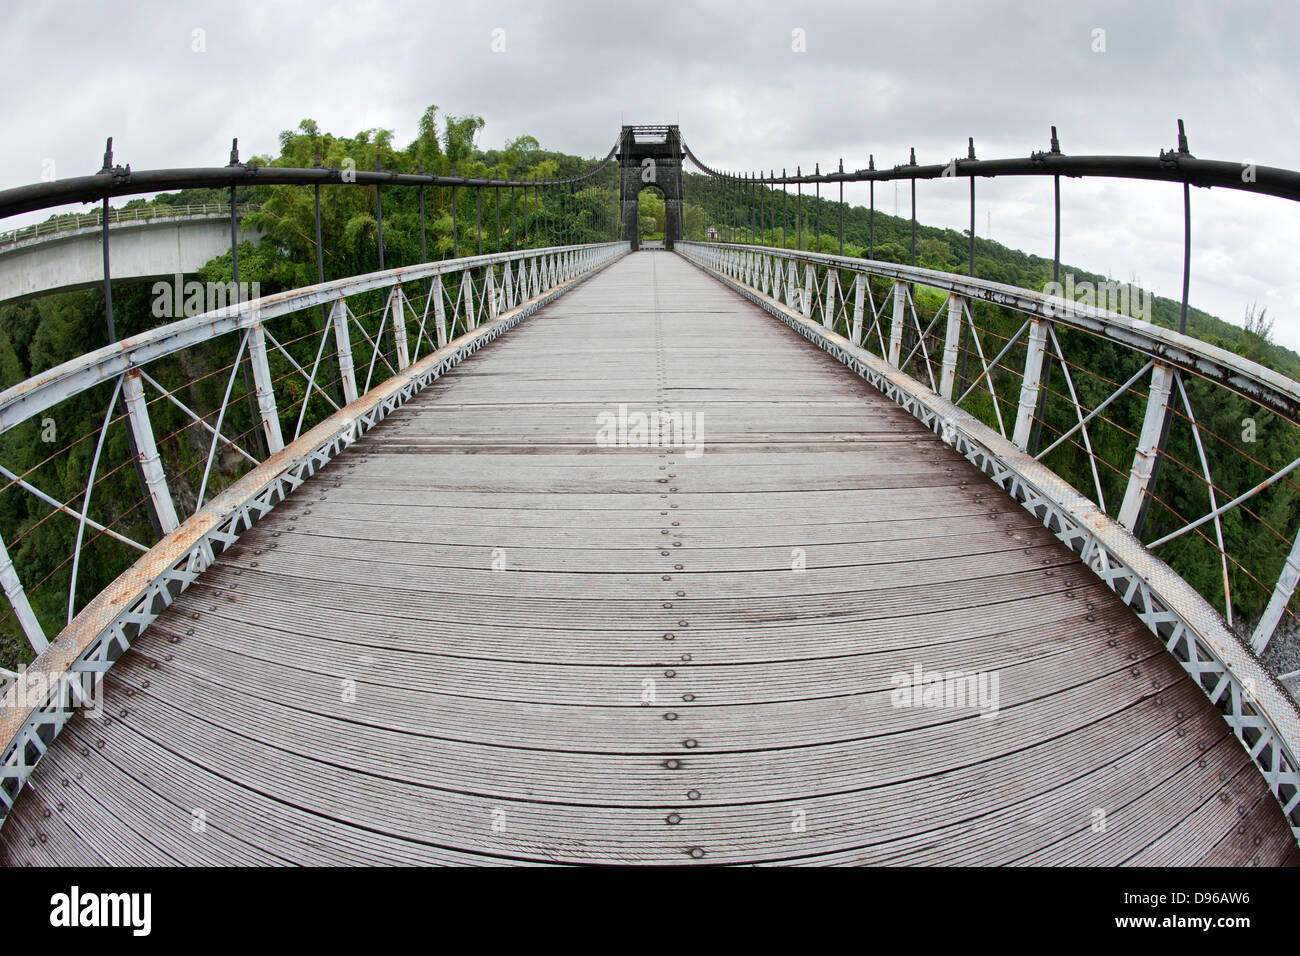 Pont Suspendu (suspension bridge) on the French island of Reunion in the Indian Ocean. Stock Photo